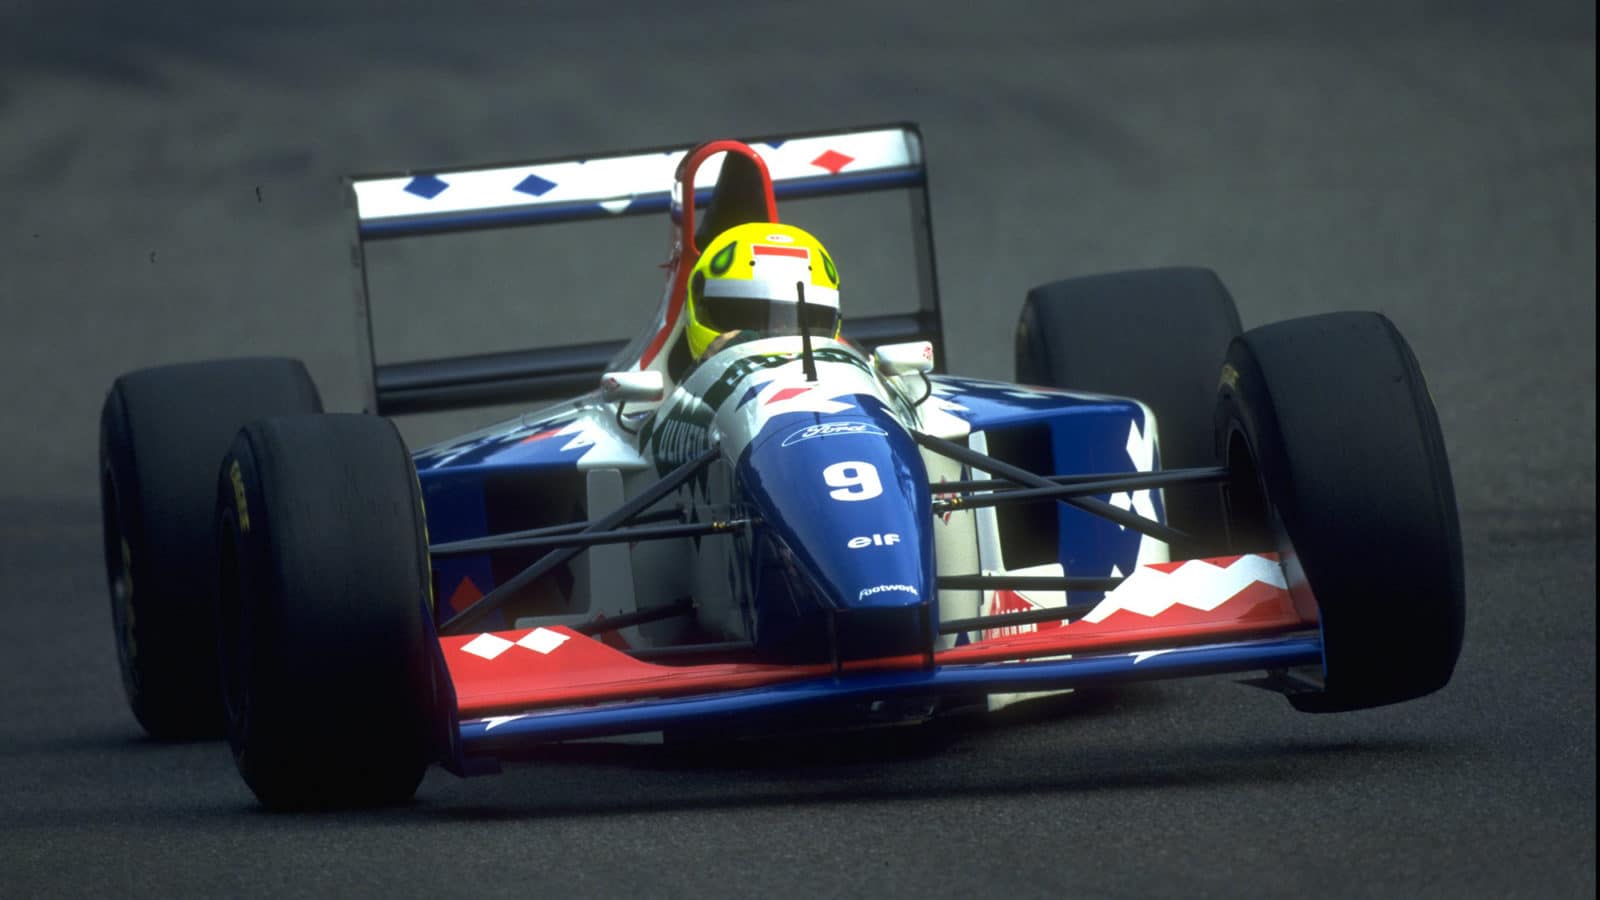 A wheel off the ground for Christian Fittipaldi in 1994 footwork Arrows F1 car